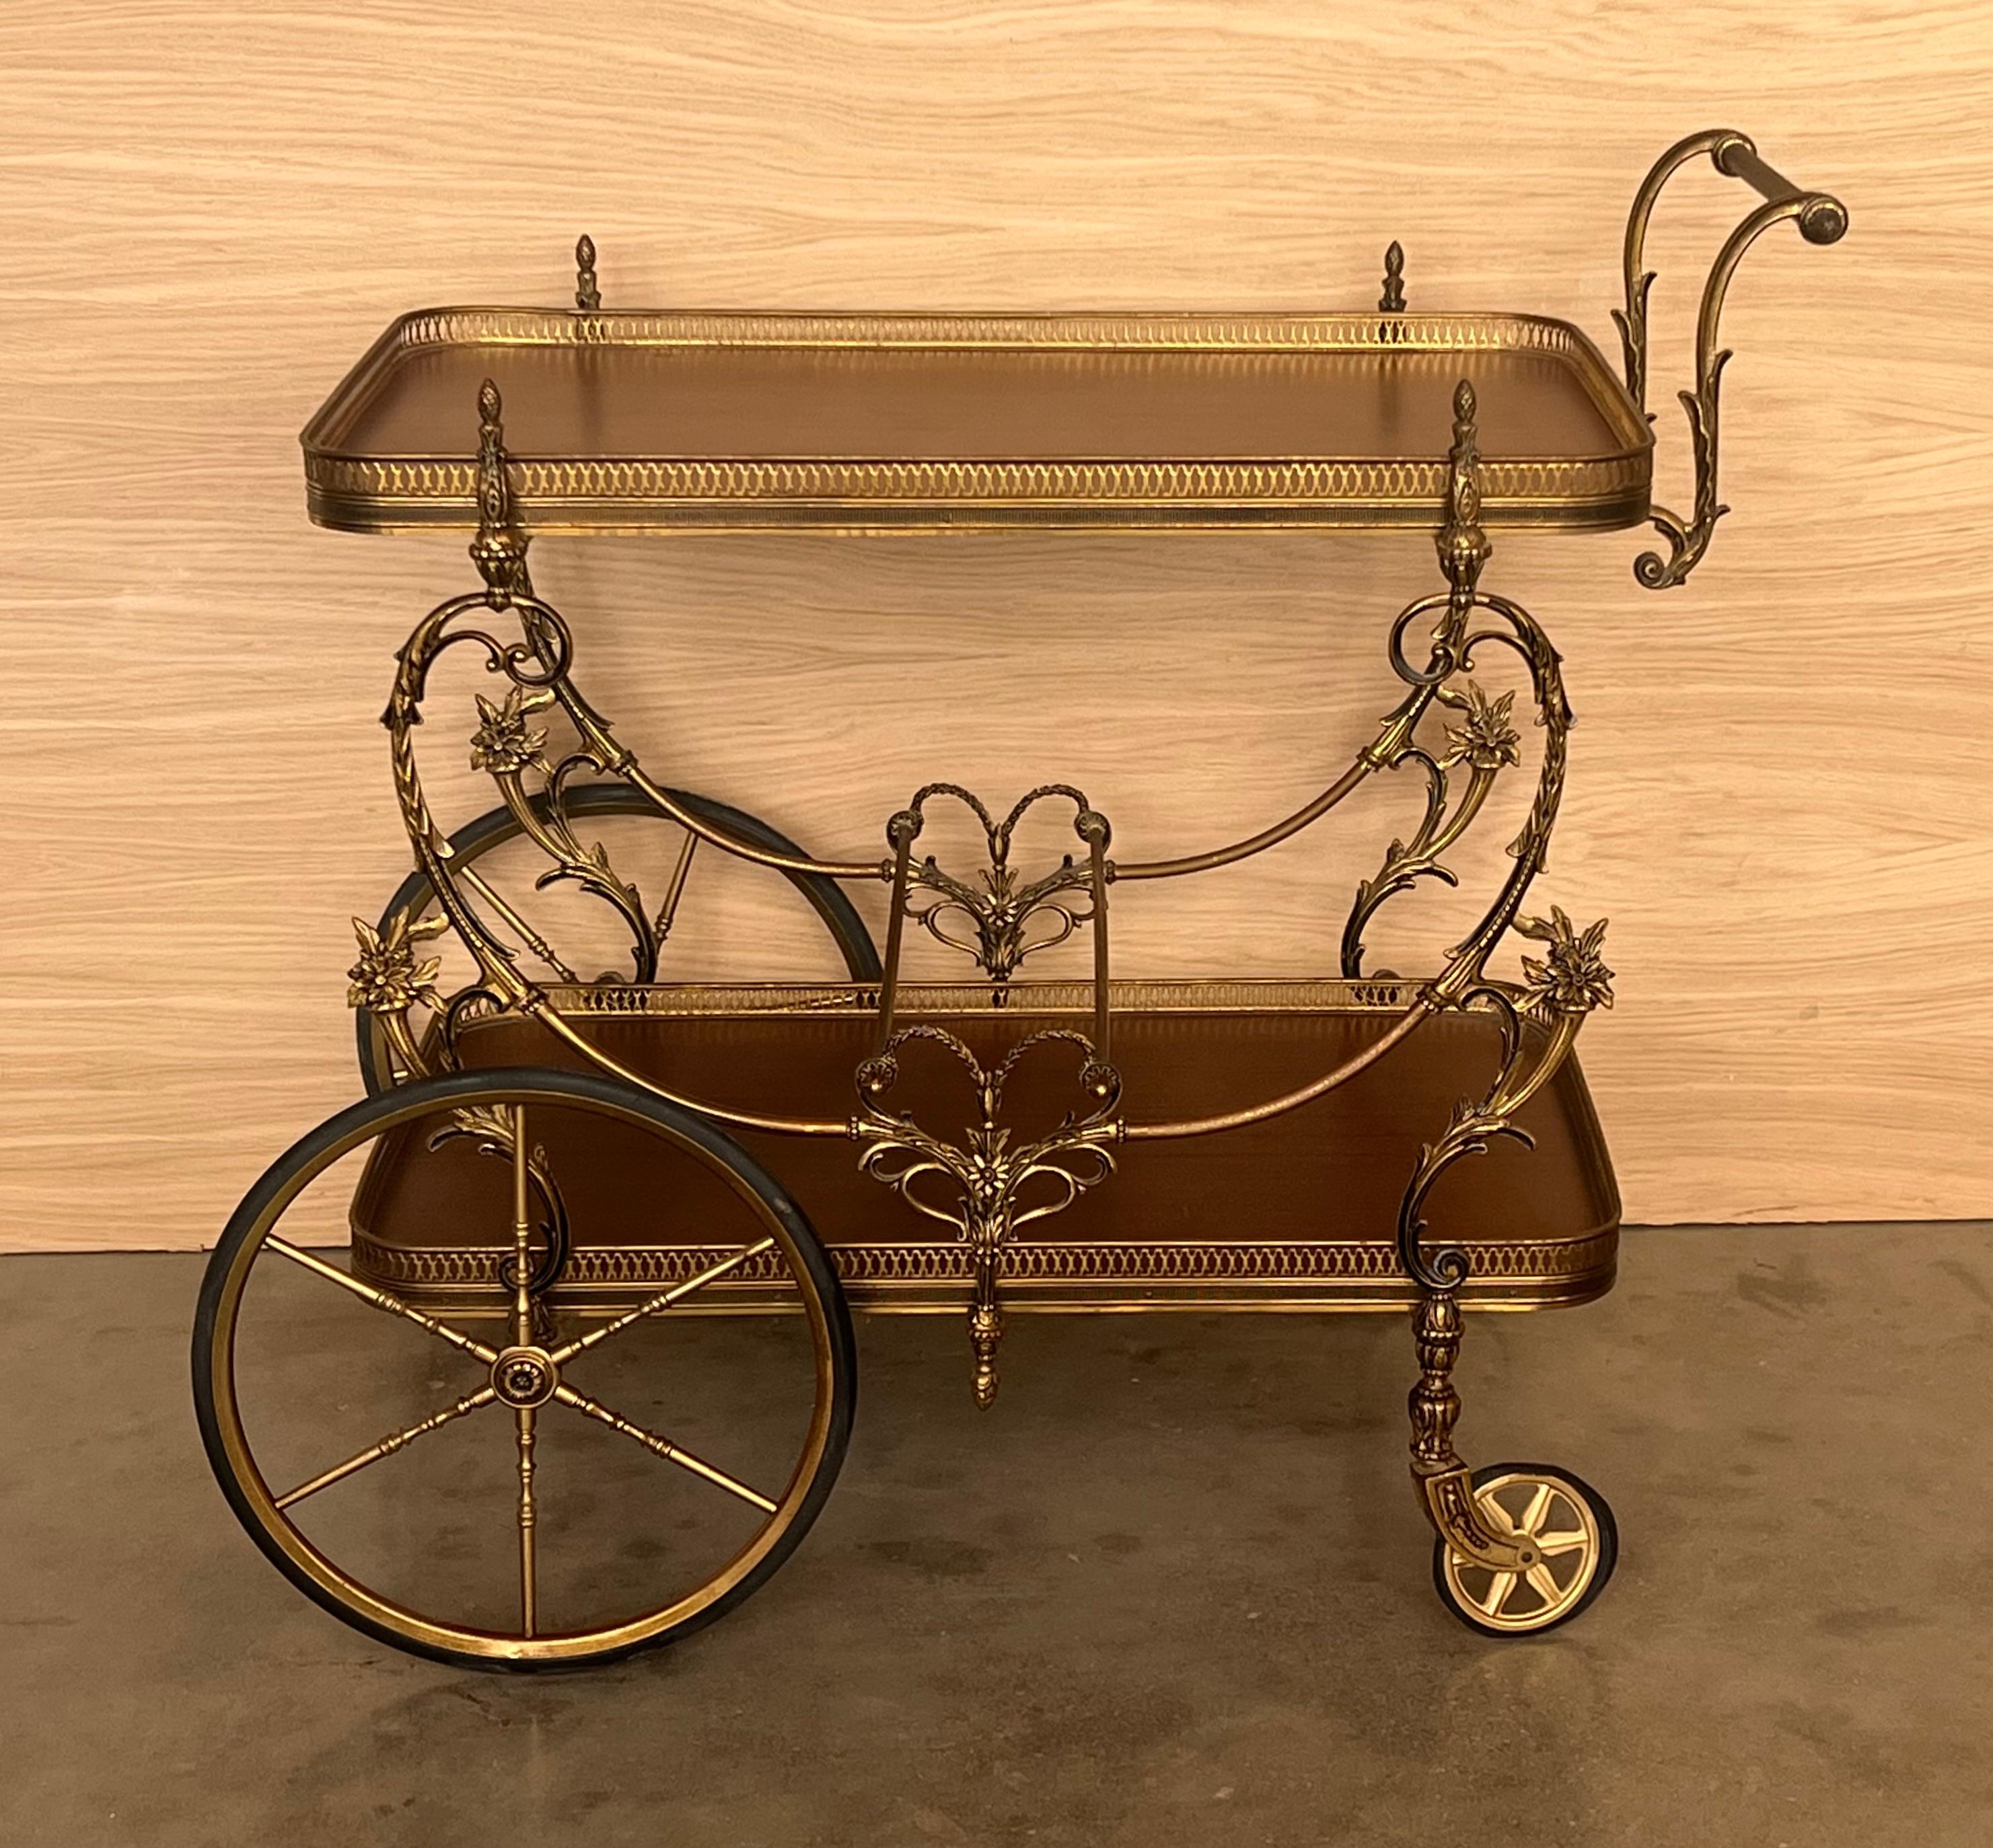 Gorgeous bronze Baroque 2 tier bar or tea cart. under the with wood shelves. Features a heavy ornate bronze frame on casters wheels.

Measure to the low shelve: 25.29in
Measure to the hight shelve: 7.87in